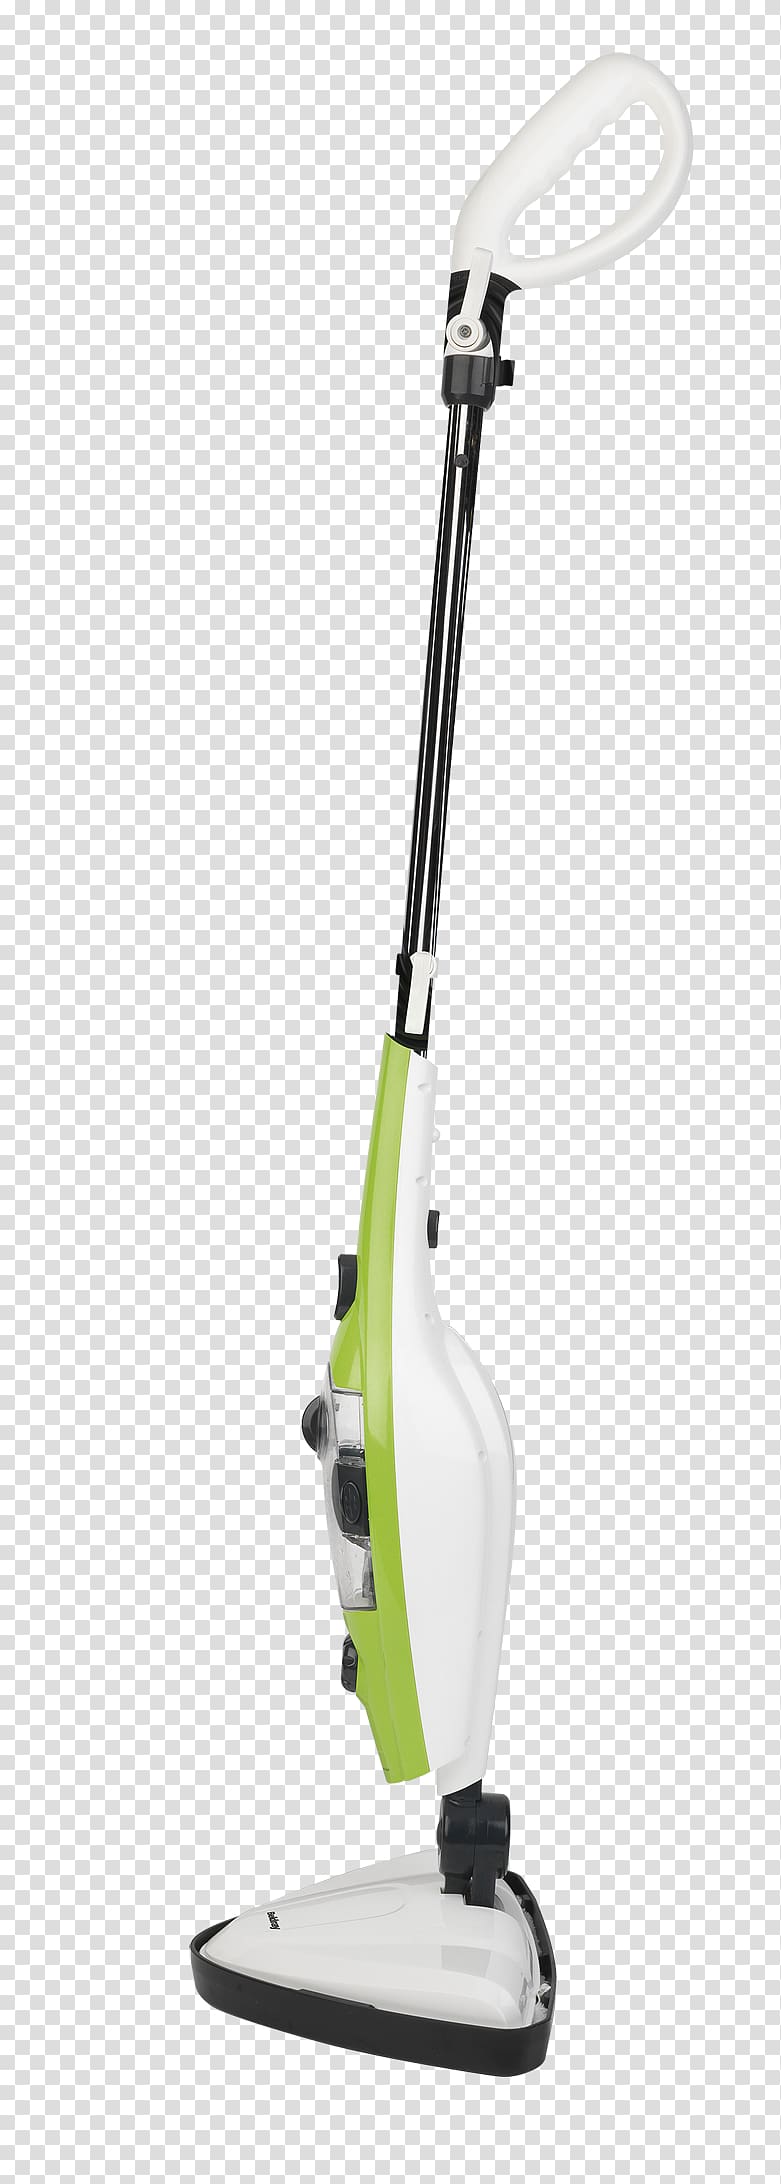 Tool Steam mop Vacuum cleaner Vapor steam cleaner, mop transparent background PNG clipart